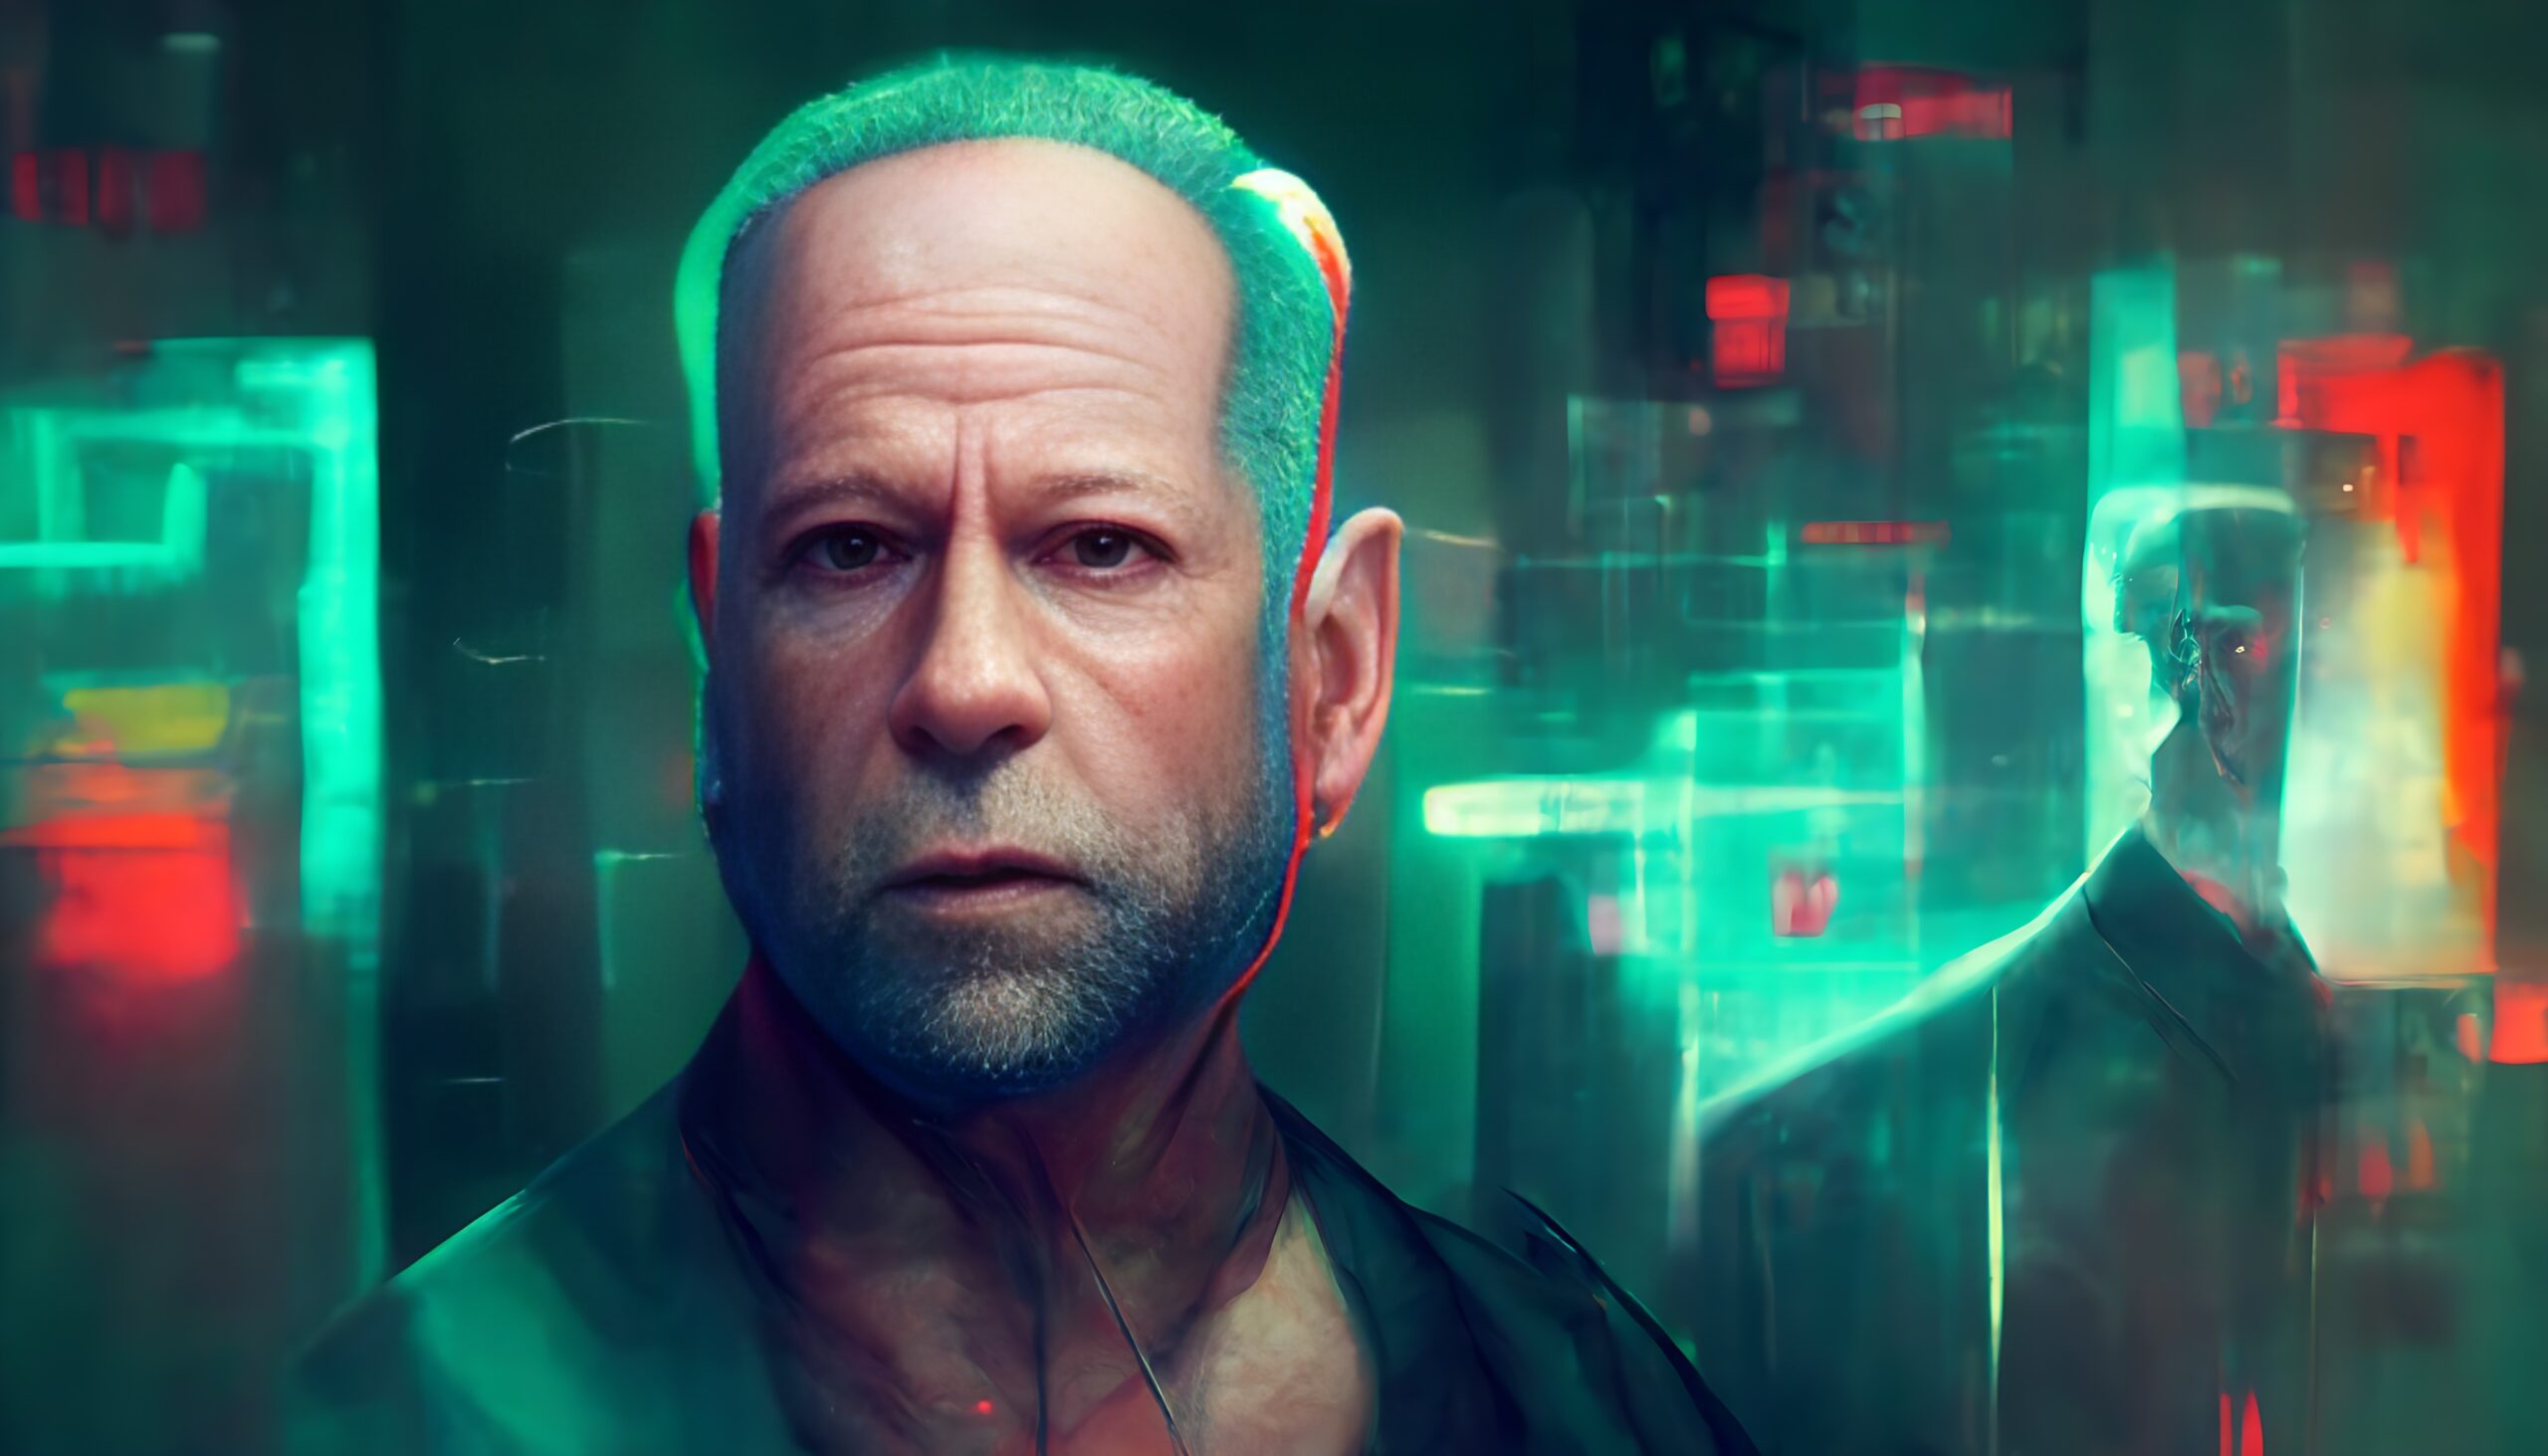 Bruce Willis did not sell his face to an video AI company